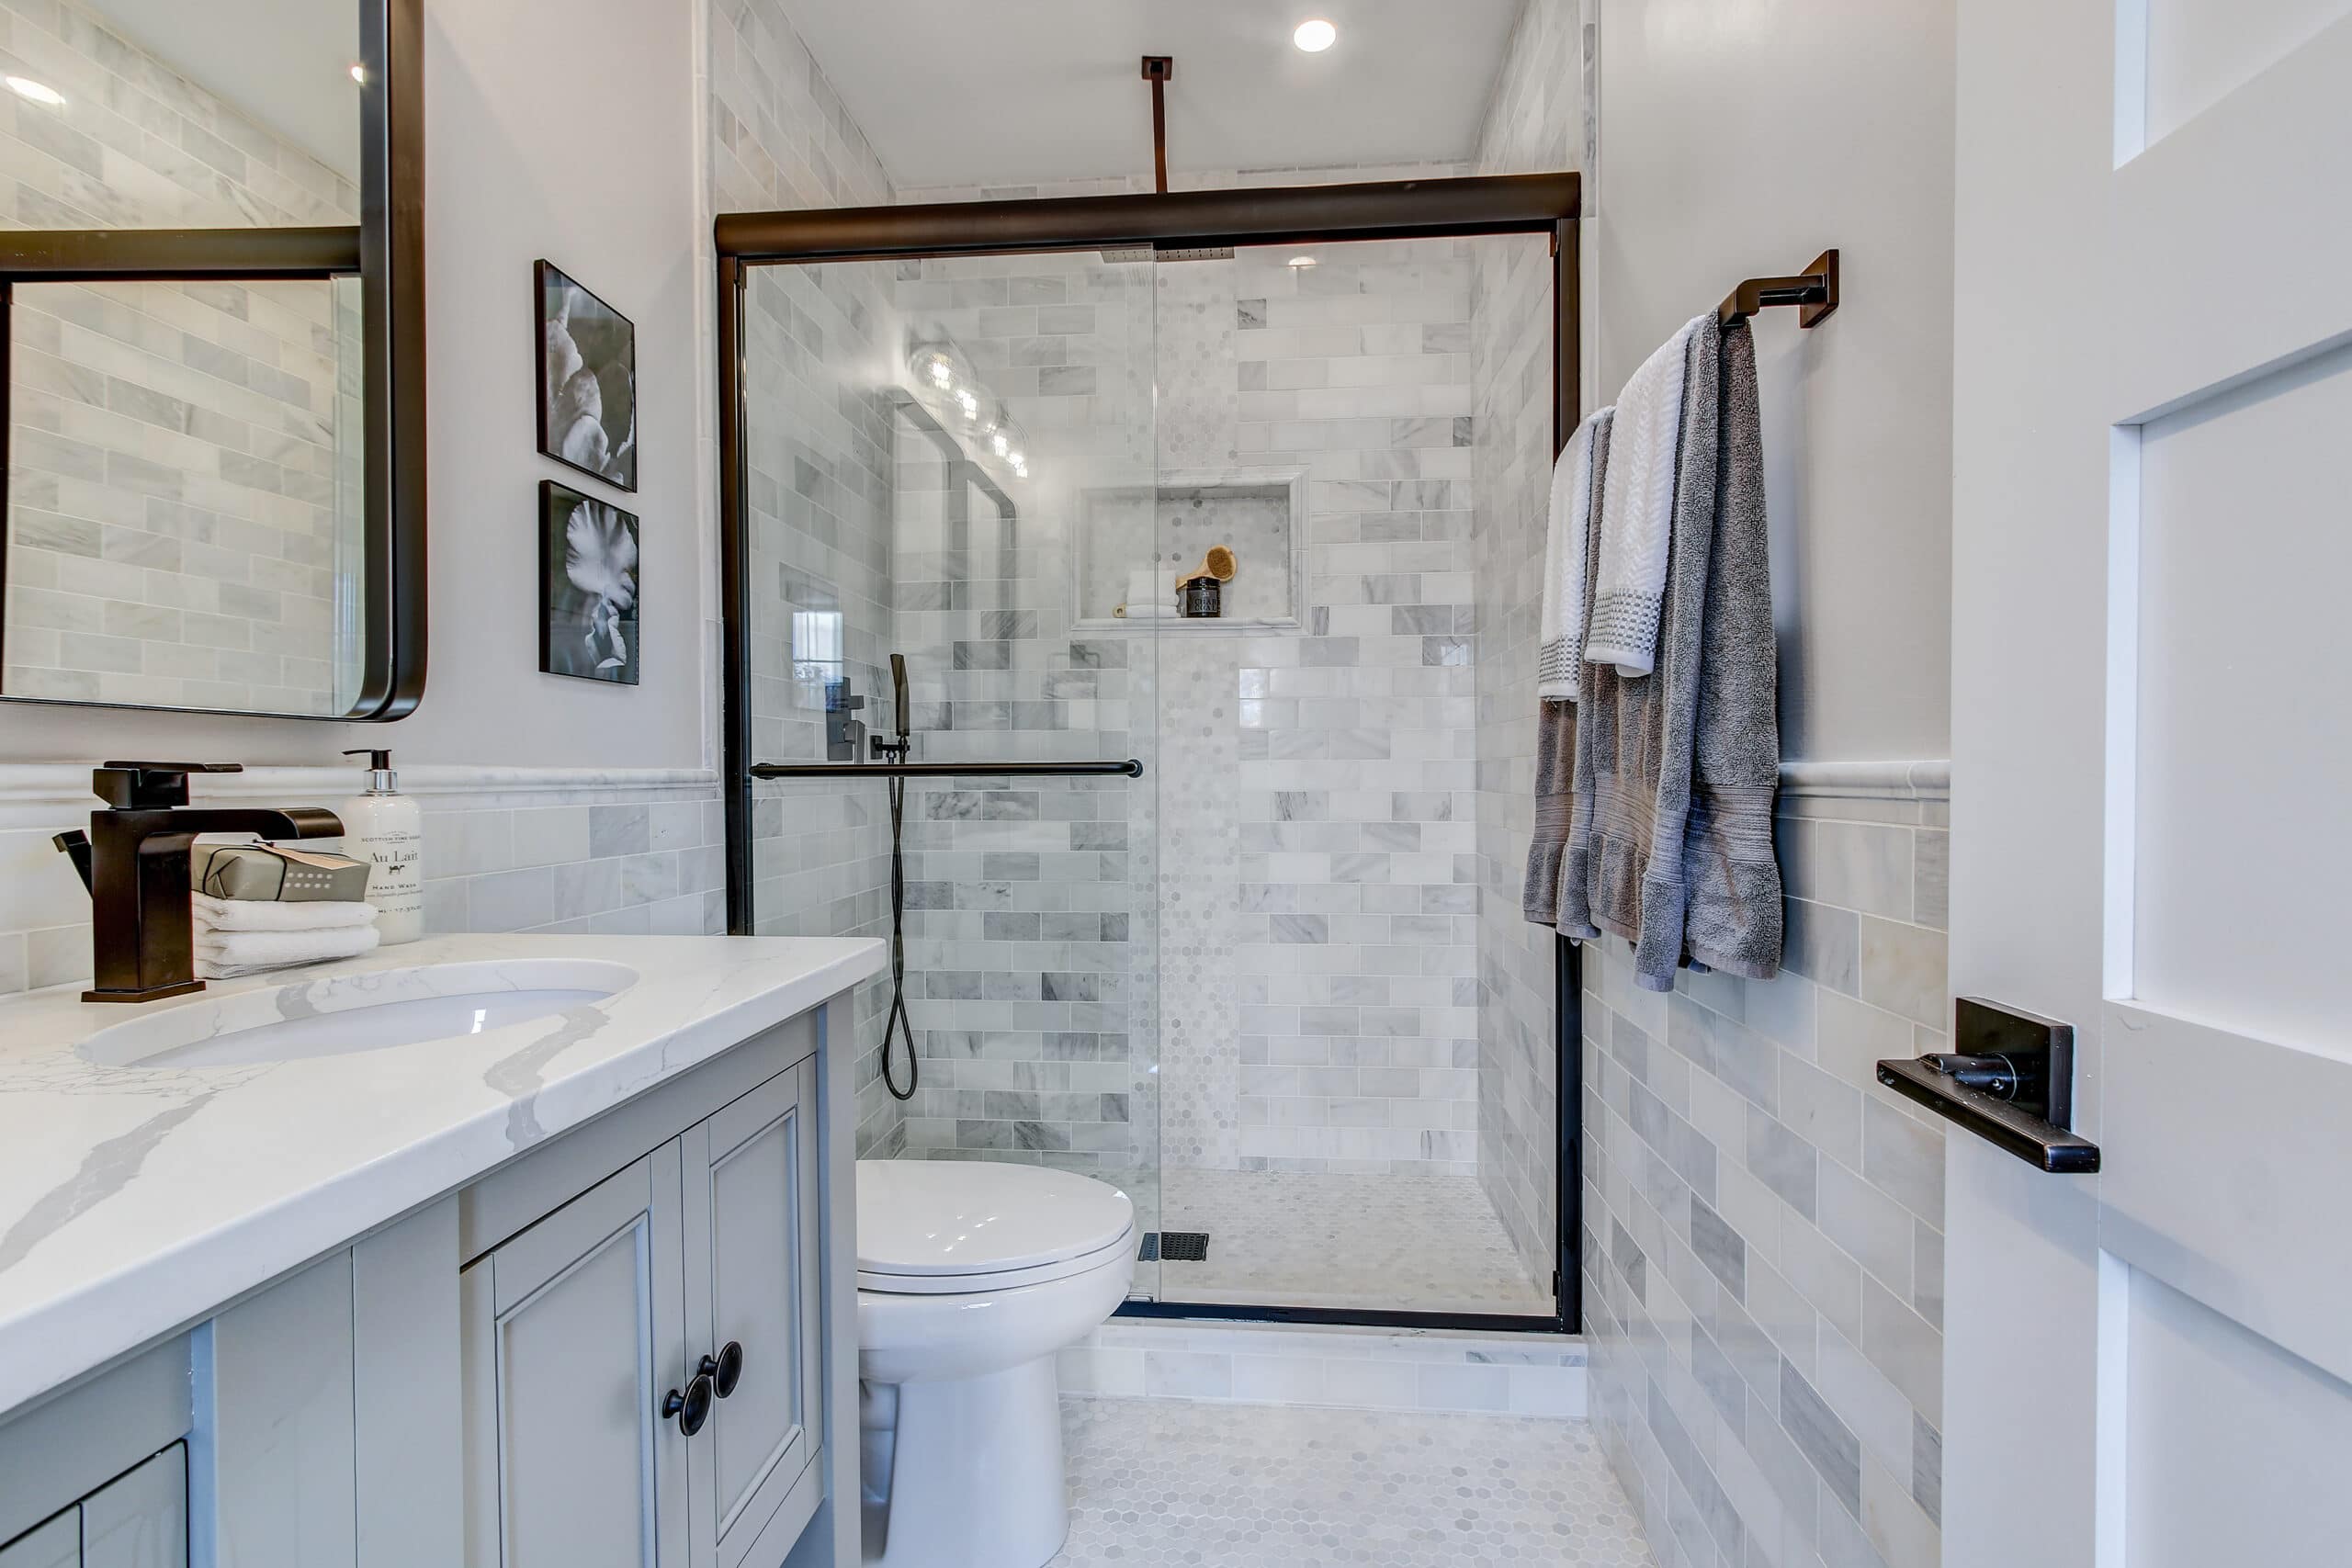 How To Add A Basement Bathroom And Do It The Right Way - How Do You Put A Bathroom In Basement